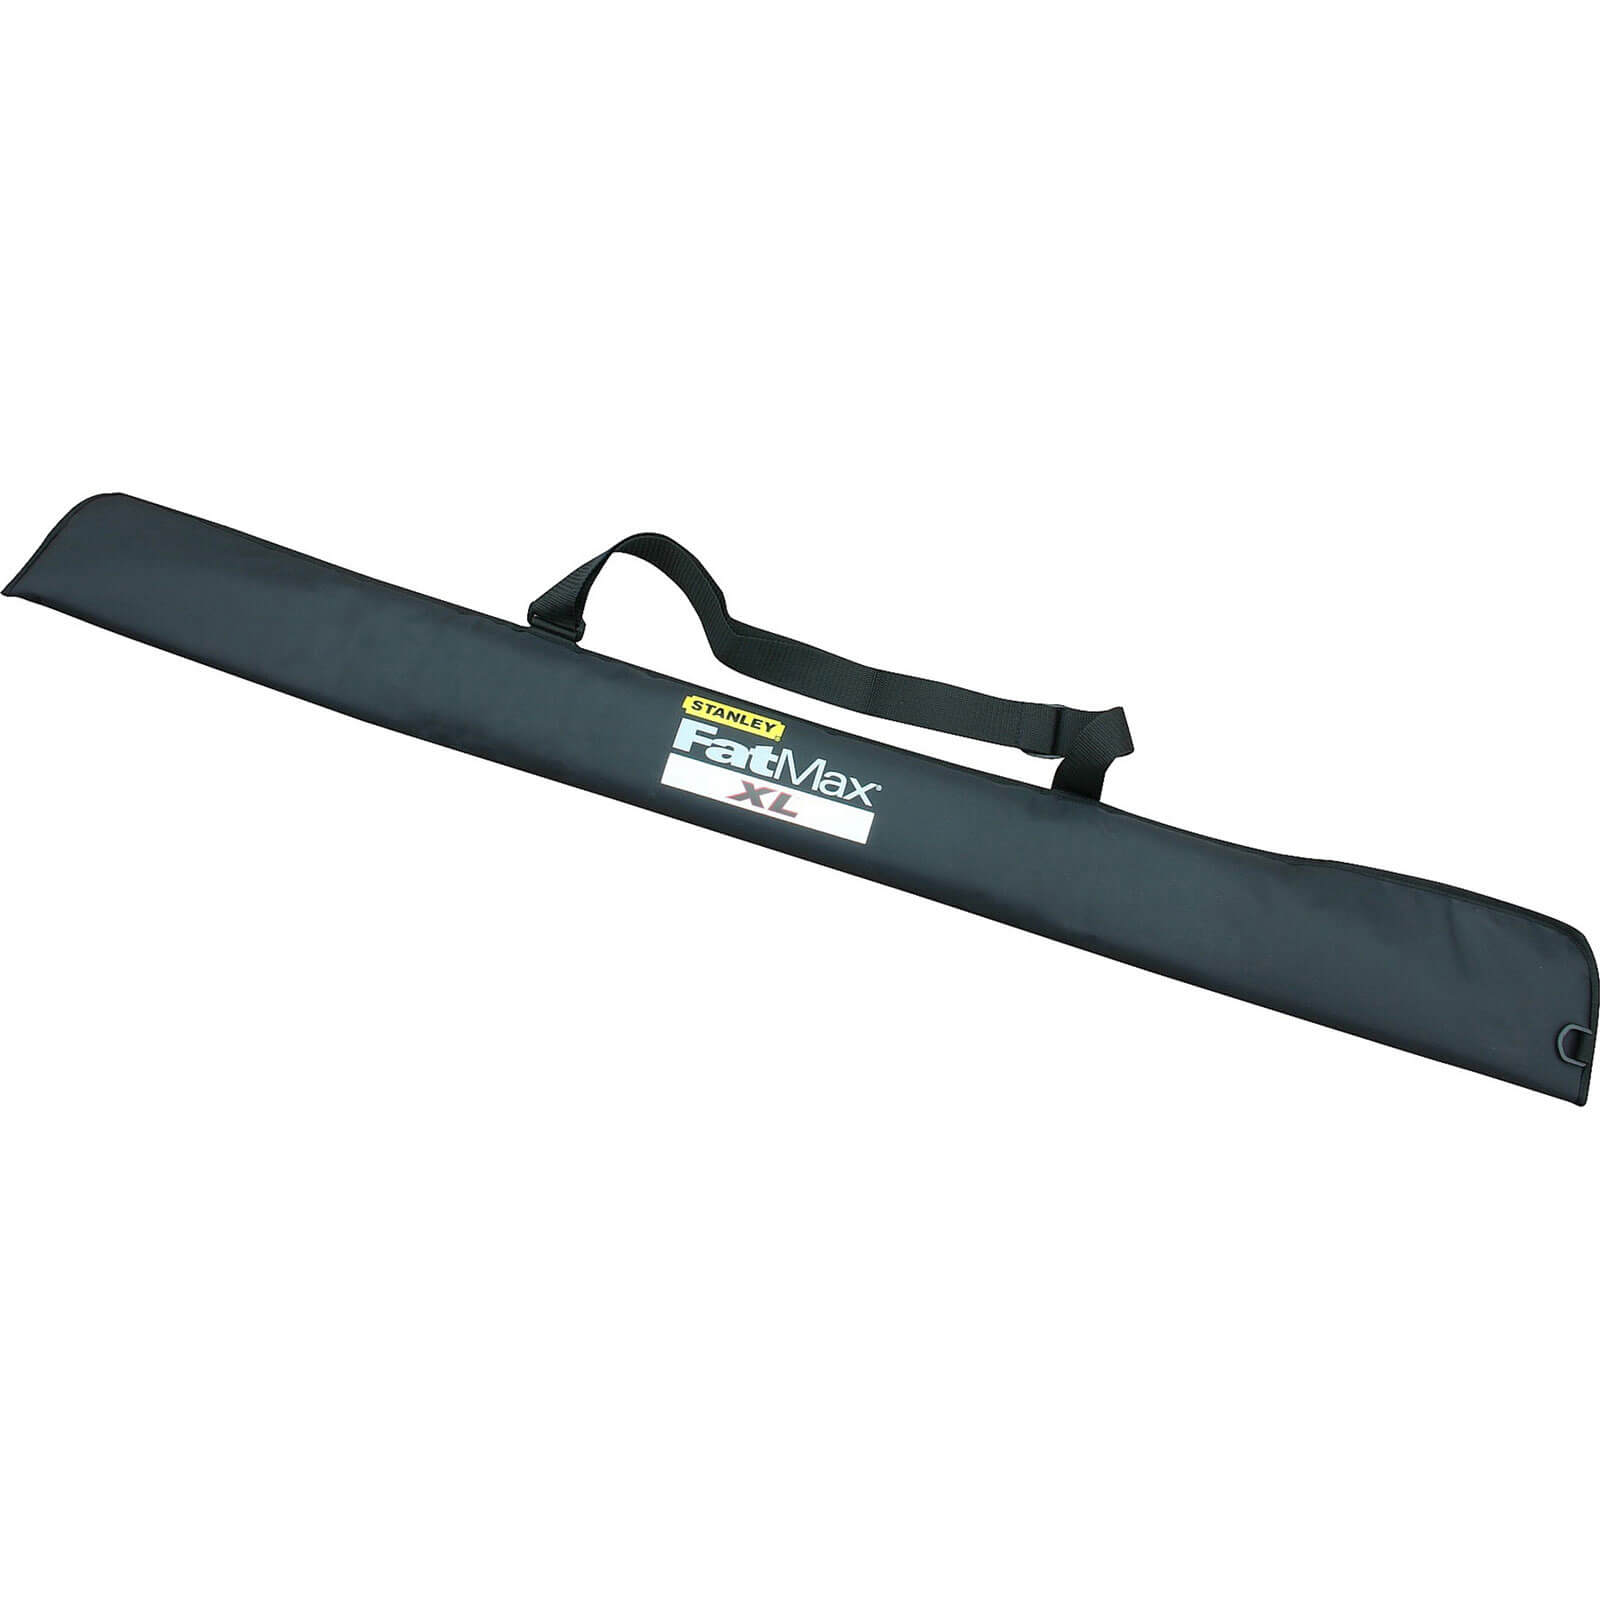 Photos - Other for Construction Stanley FatMax Spirit Level Padded Carrying Bag 48" / 120cm 